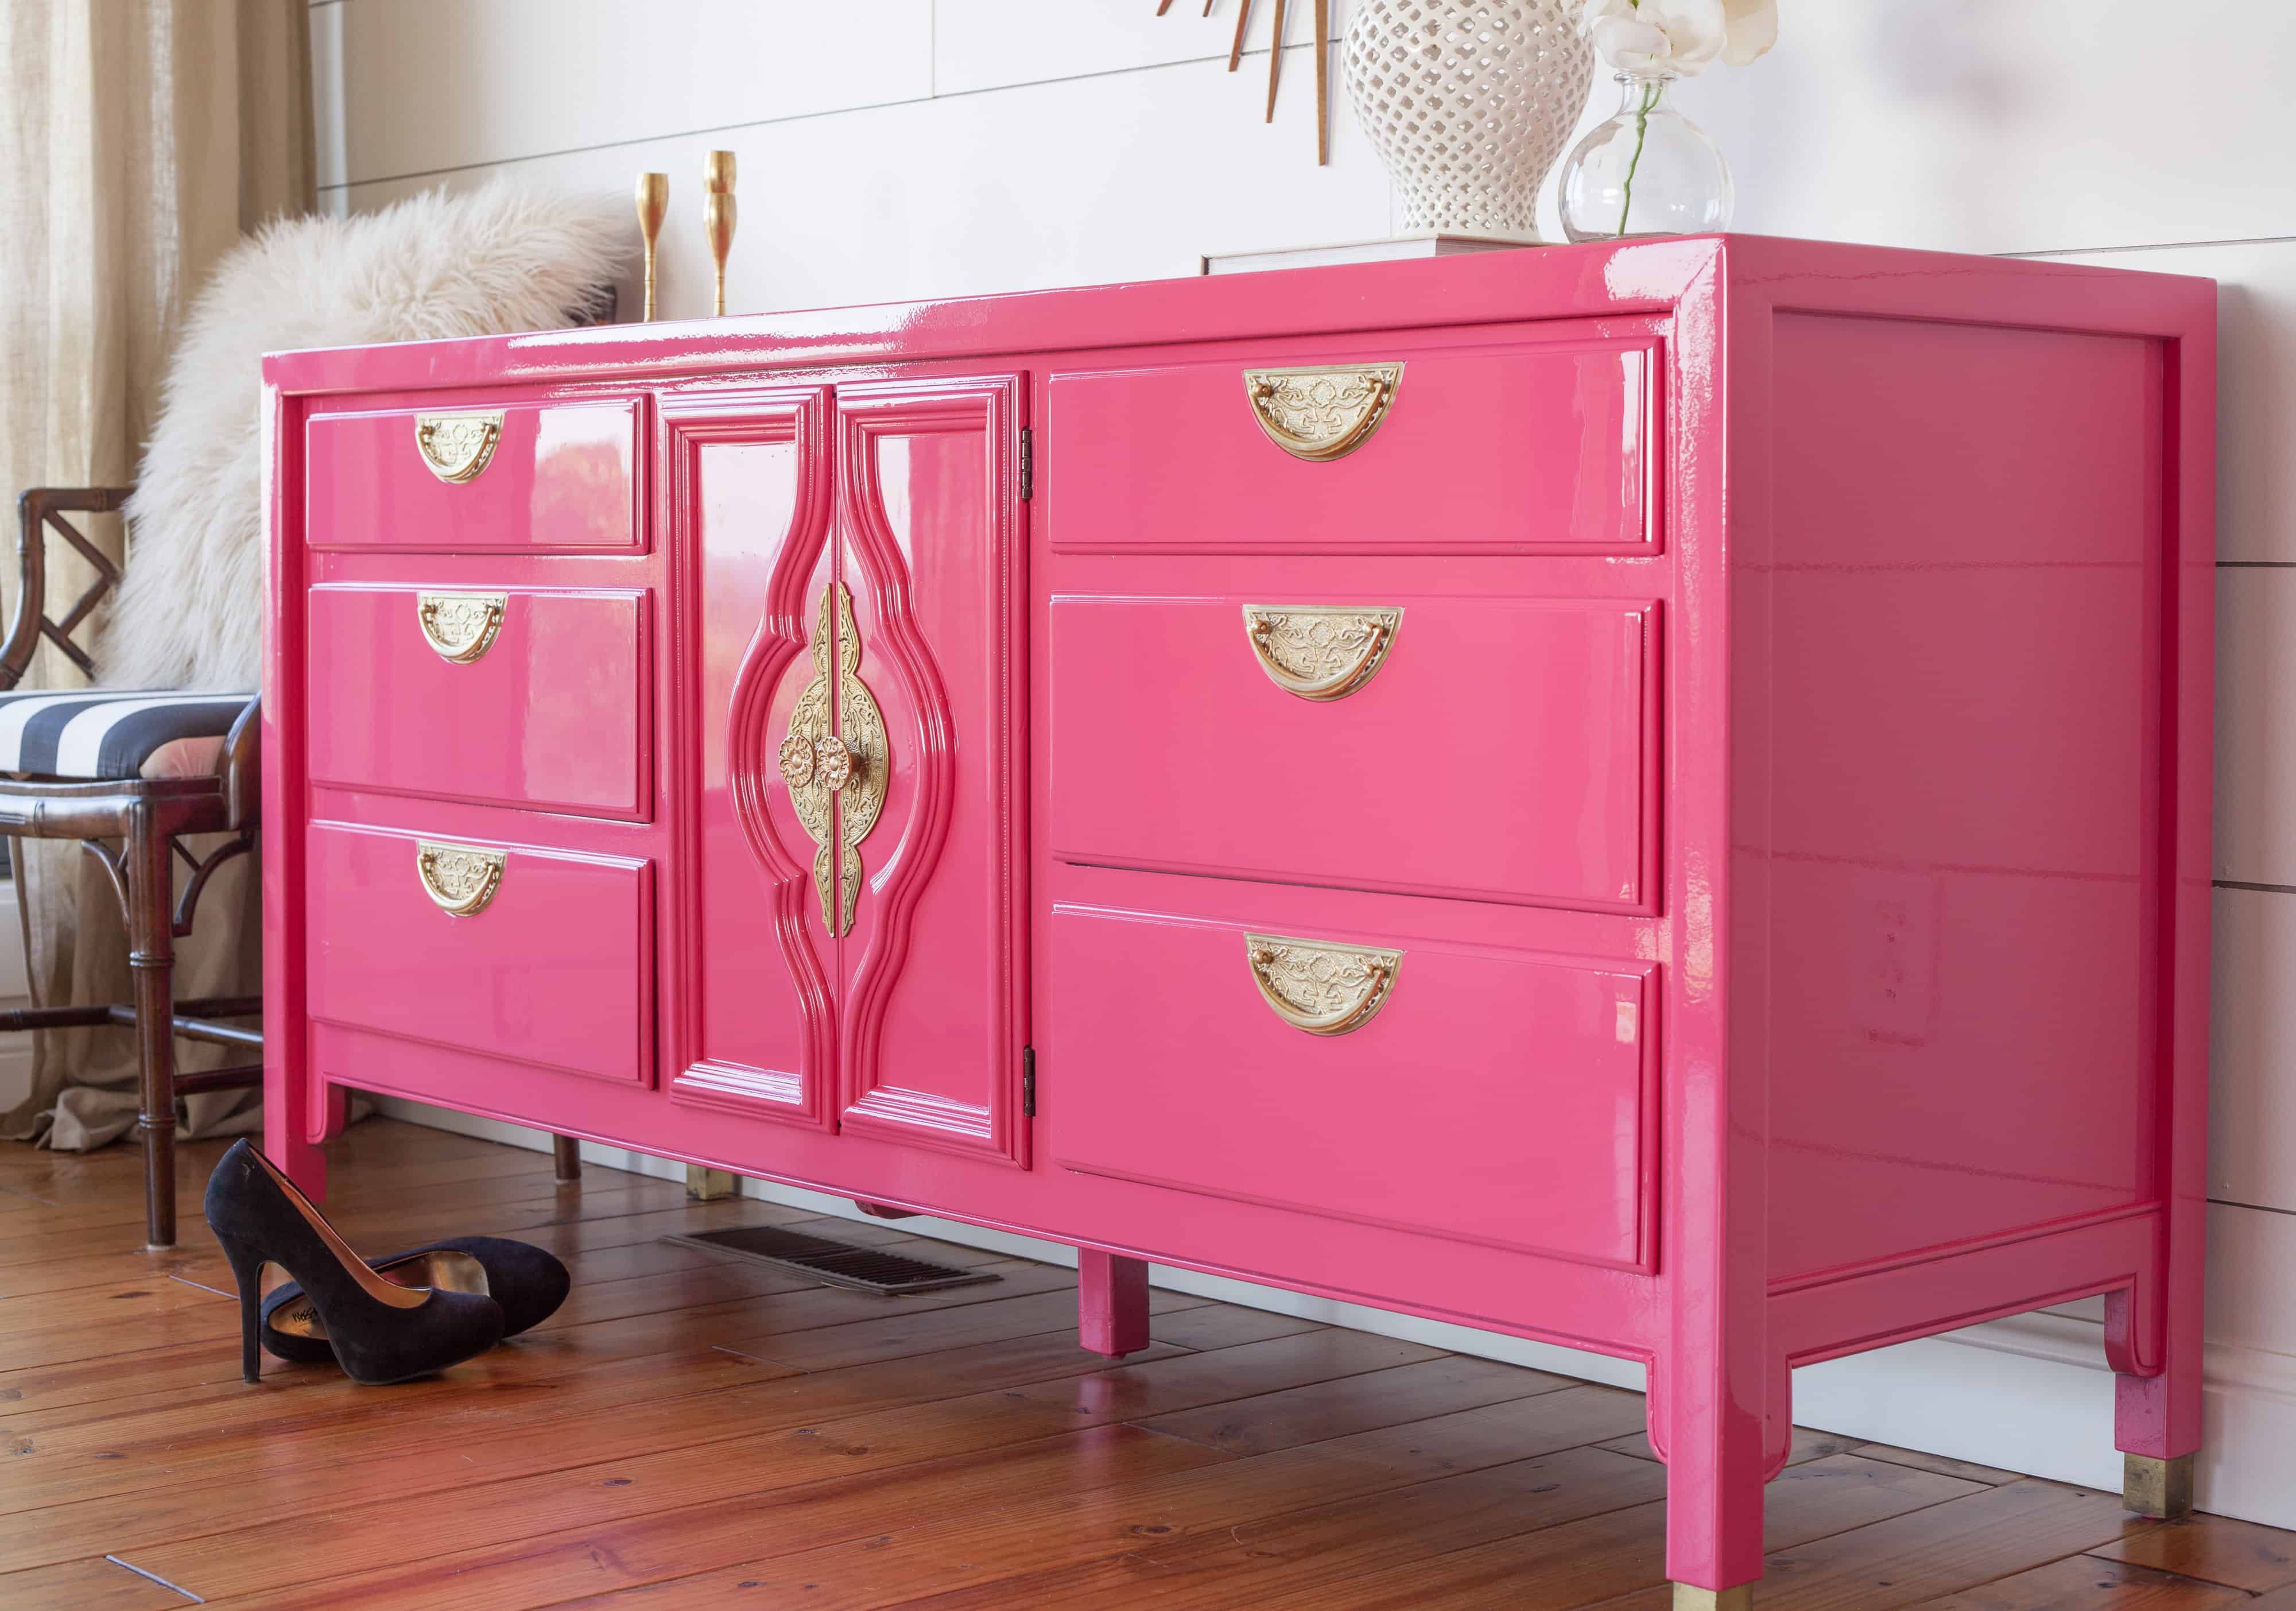 How To Paint High Gloss Finish On Wood Furniture Pertaining To Pink High Gloss Wardrobes (View 7 of 15)